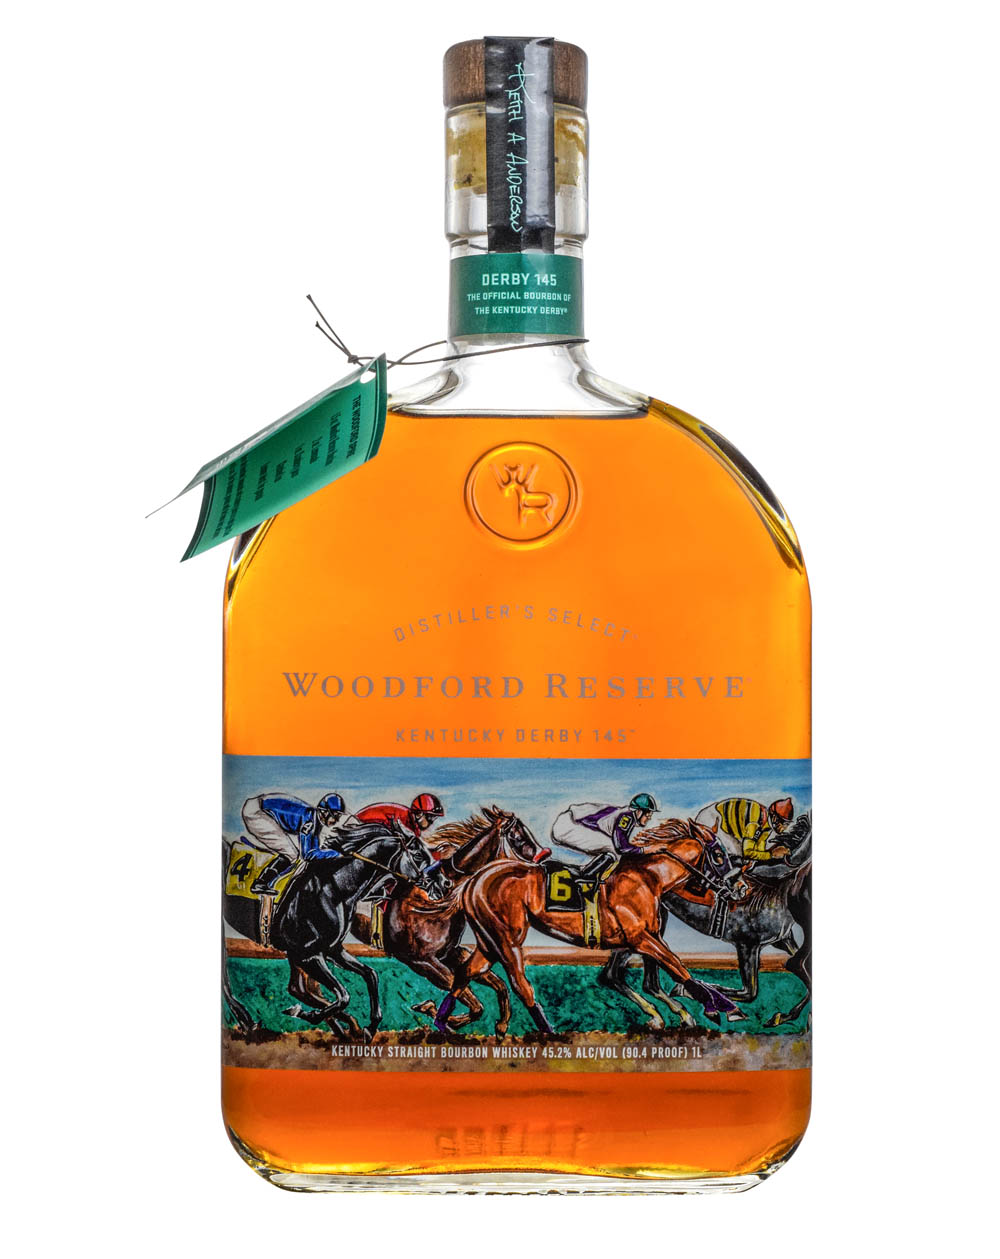 Woodford Reserve Kentucky Derby 145 Must Have Malts MHM